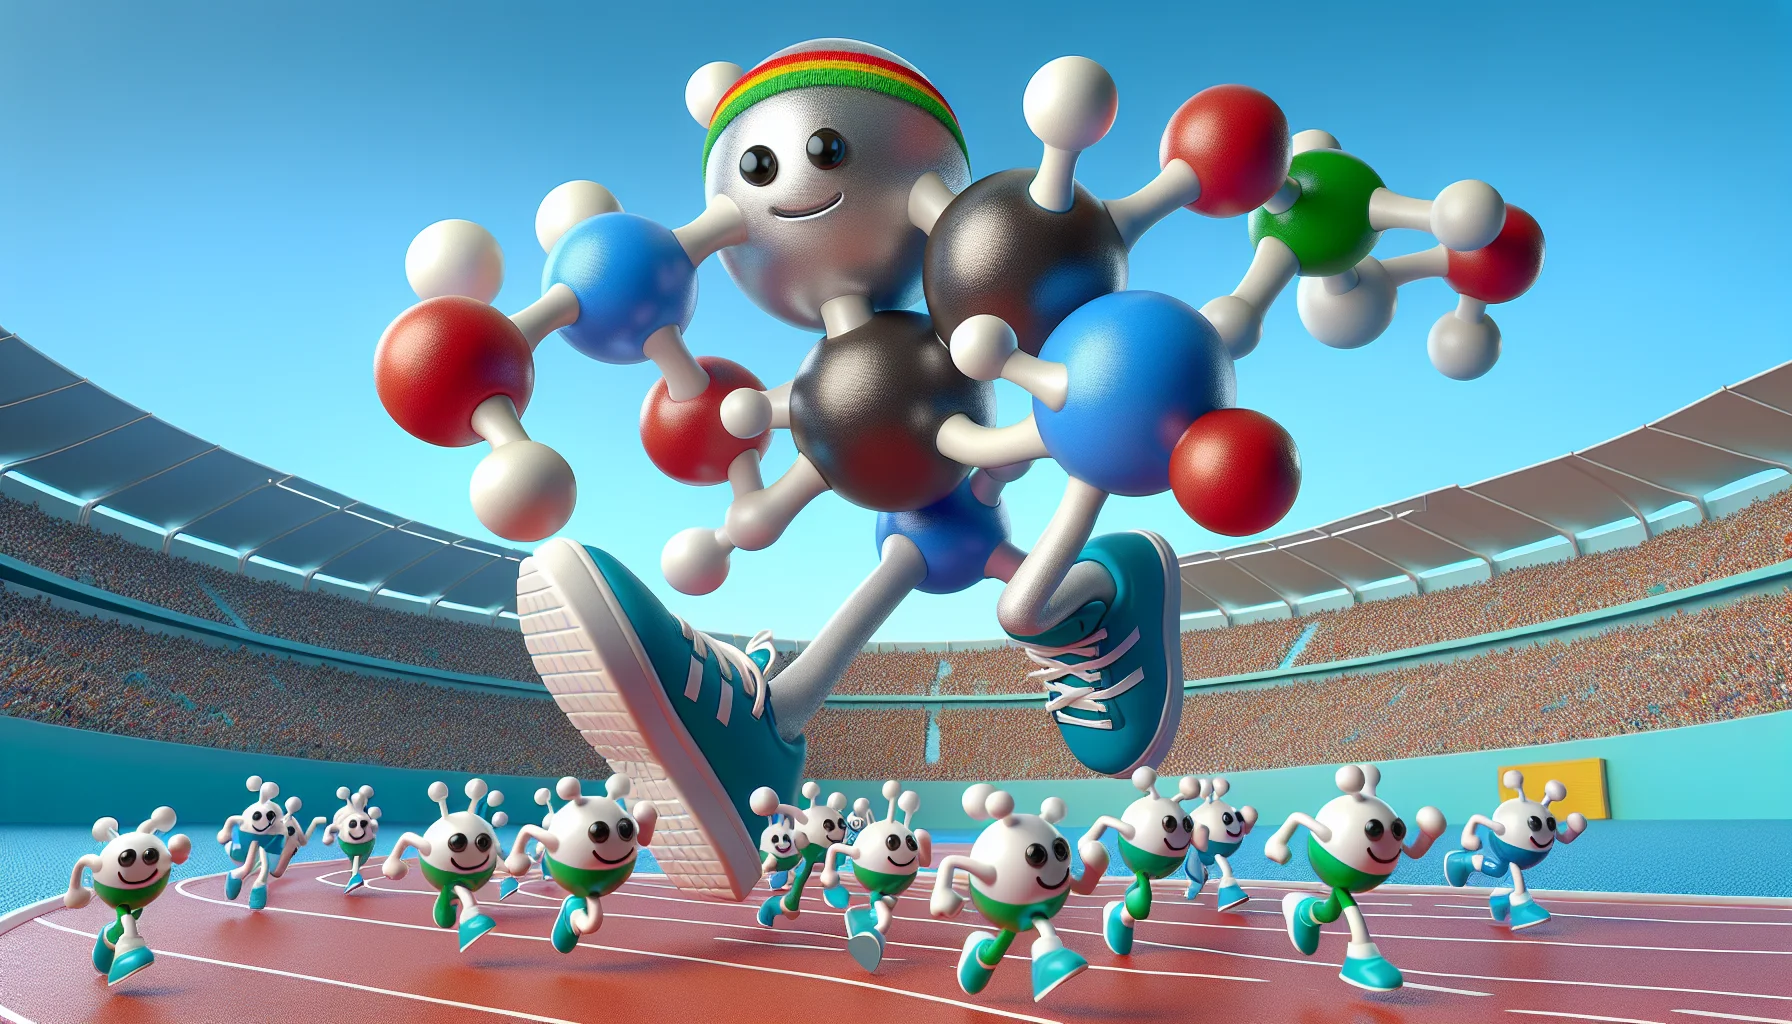 Create an image depicting a fun and engaging scene: a giant magnesium lysinate glycinate chelate molecule in a stylized, anthropomorphic form, equipped with running shoes and a headband, is challenging other smaller molecules to a running race. The scene is at a 'Molecular Olympics', a fictional event in a microscopic world. The magnesium molecule, full of energy and enthusiasm, is portrayed as the ideal sports supplement, enticing viewers to consider using supplements for sports. There should be a variety of other supplement molecules, each of different shapes and sizes, representing a broad spectrum of nutrients present in sports supplements.